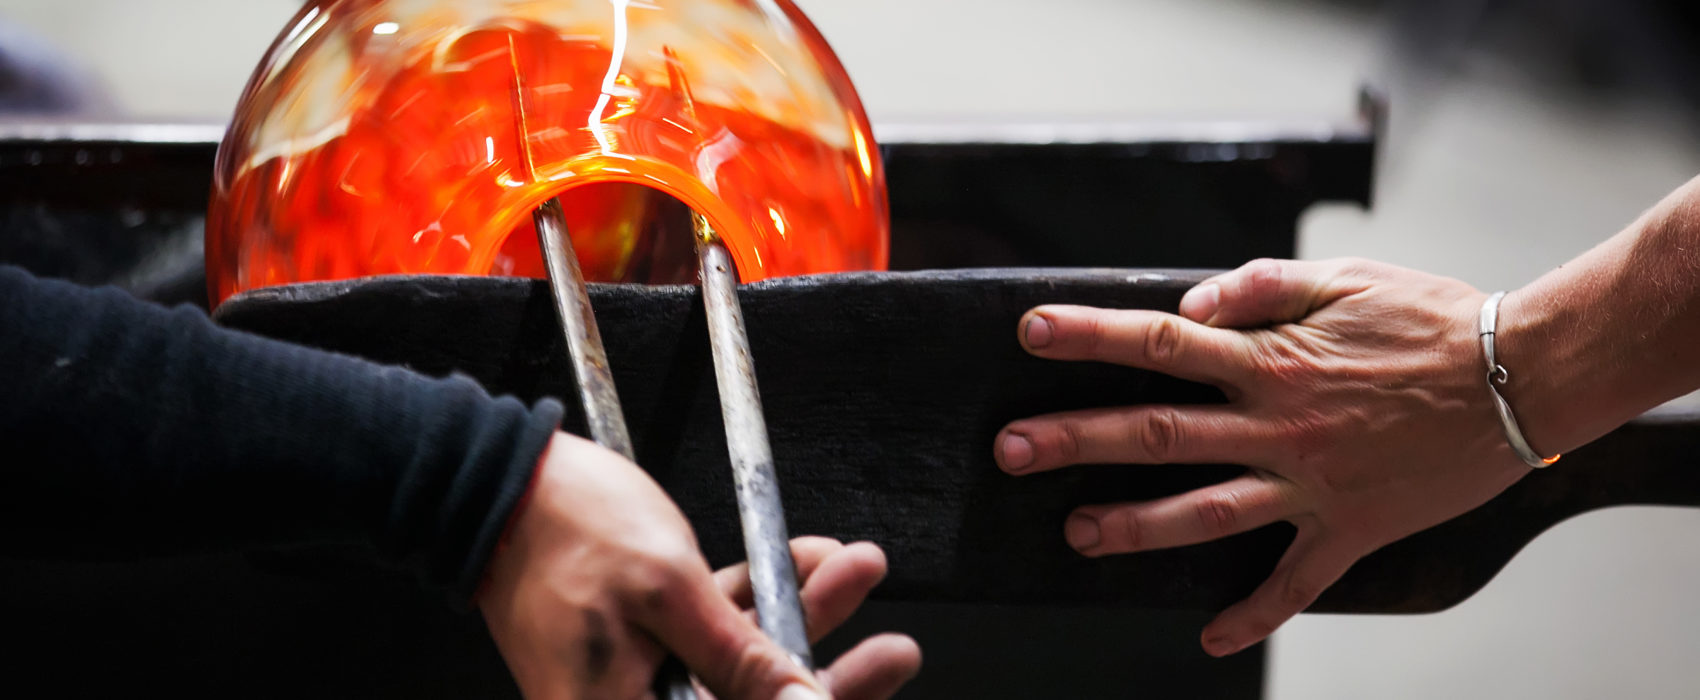 glass blowing in action, history of glass